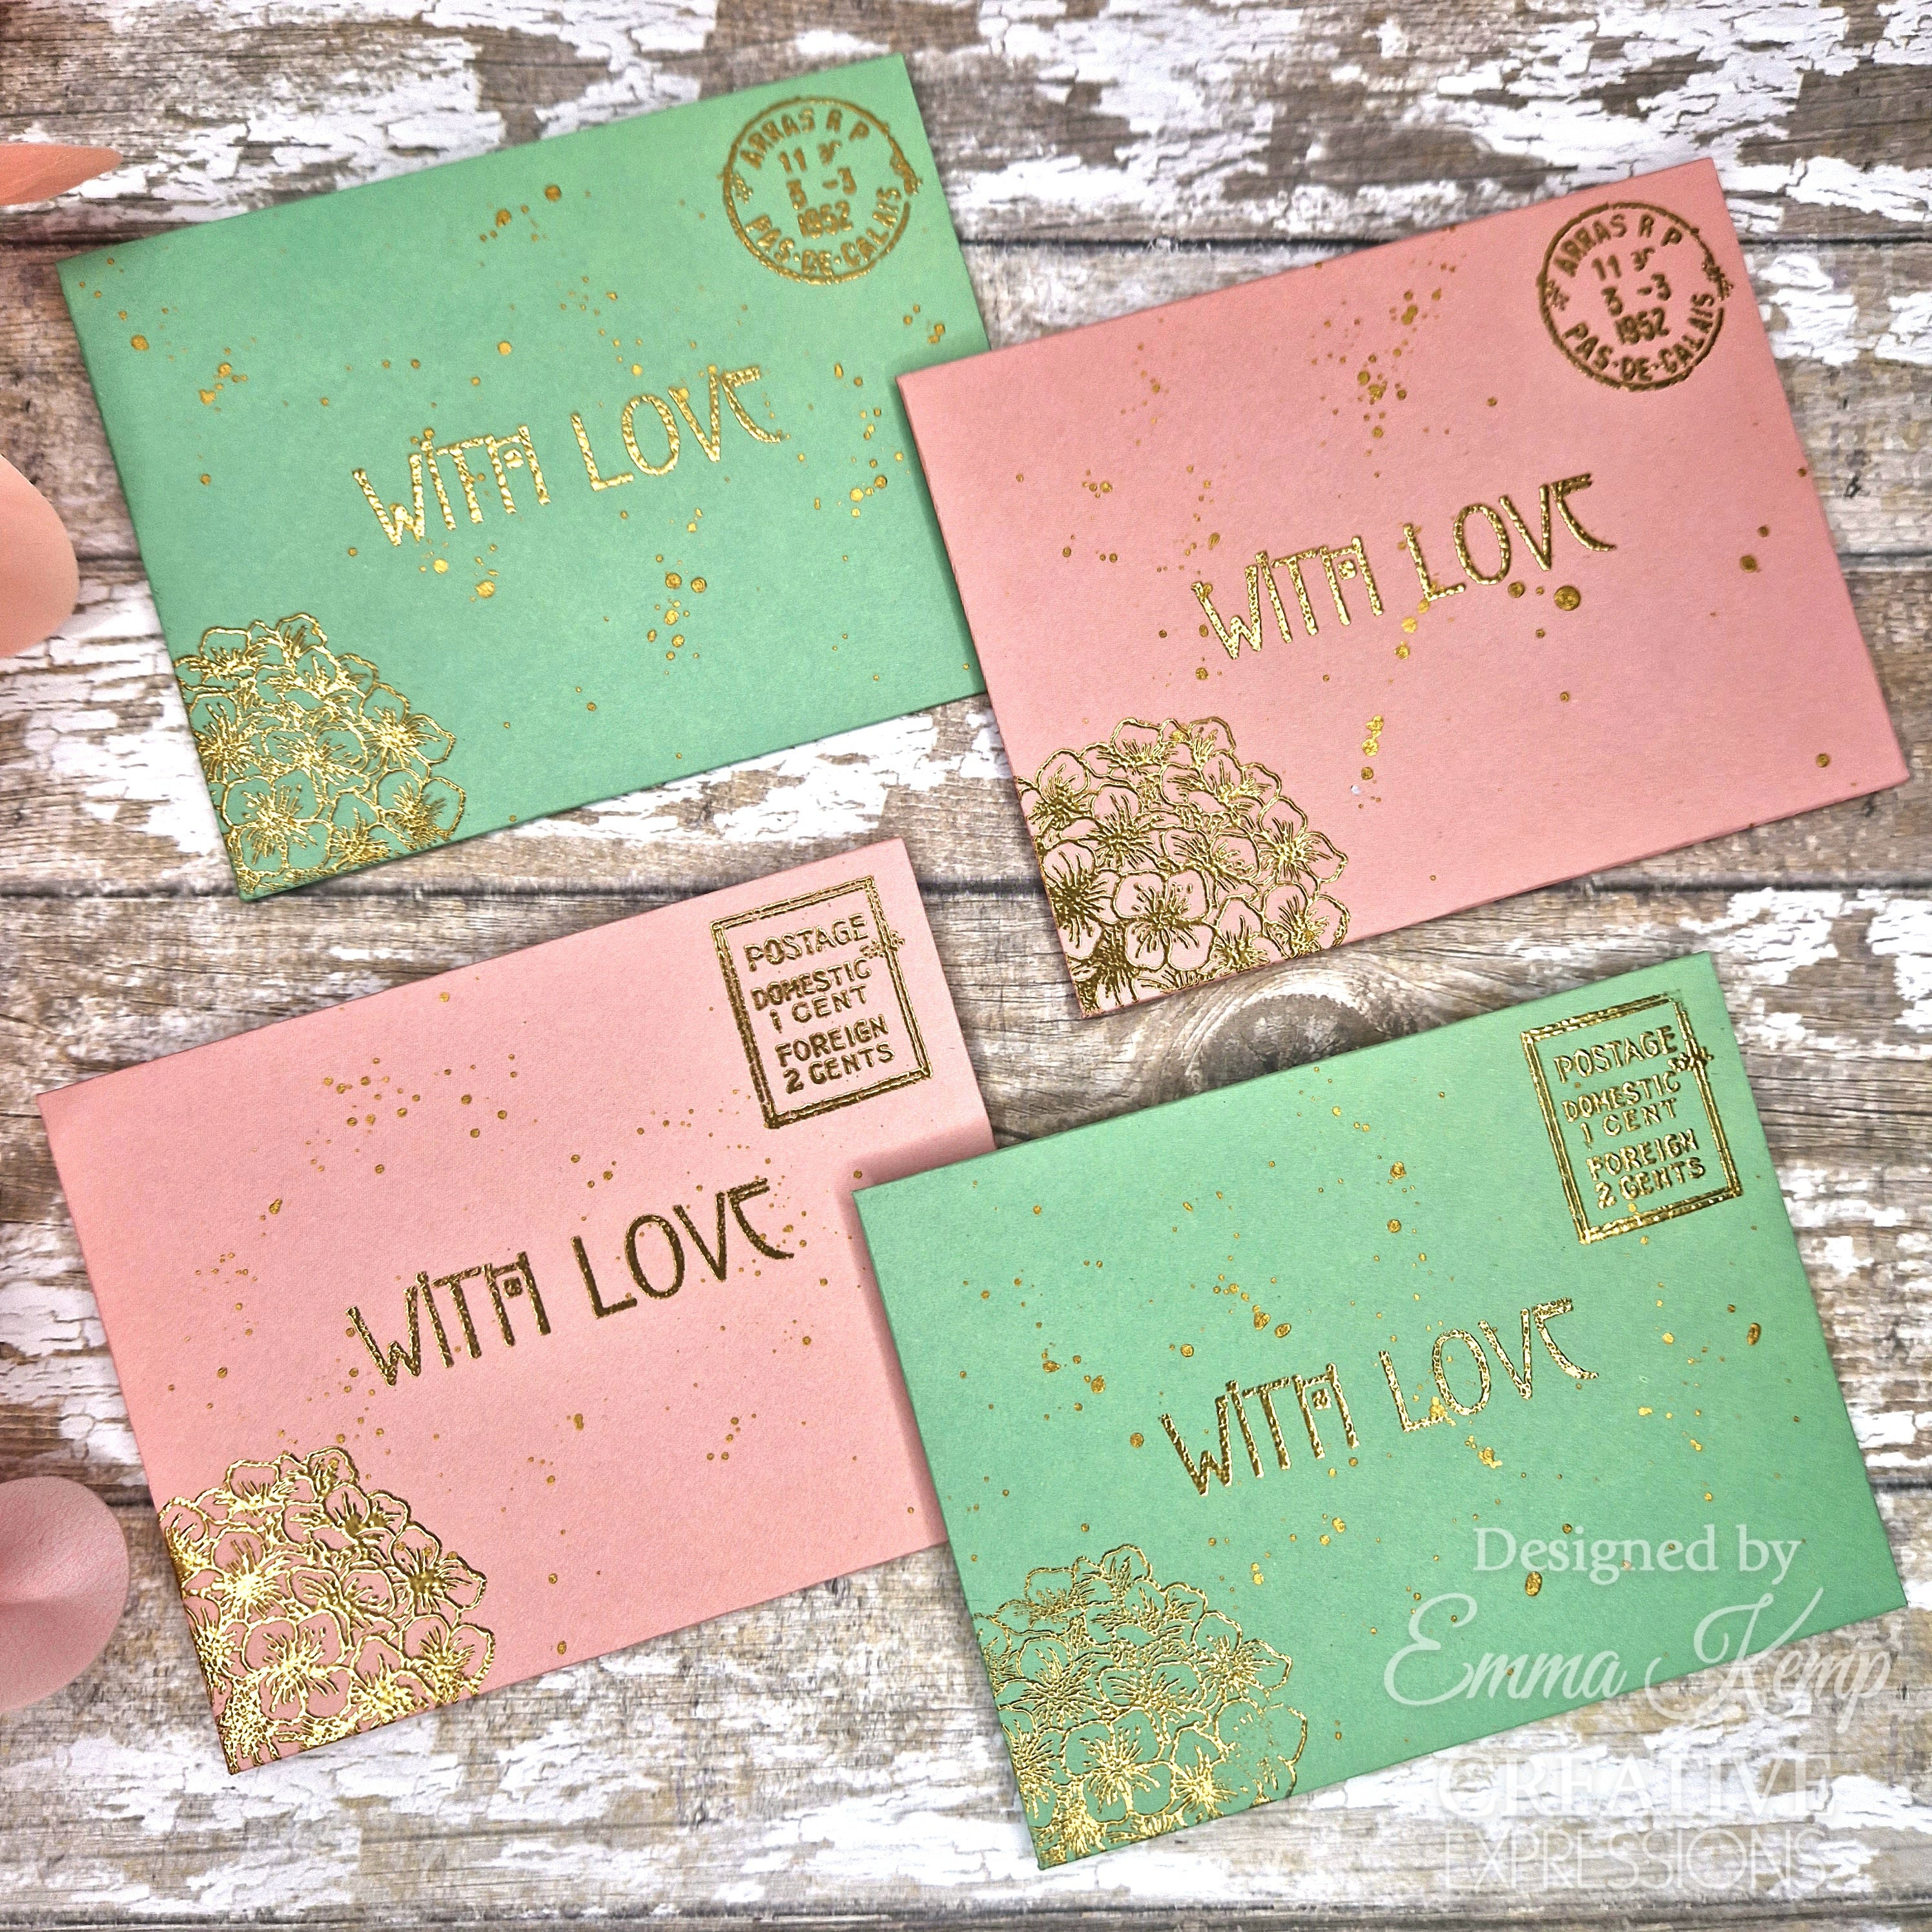 Woodware Clear Singles Garden Tags 6 in x 8 in Stamp